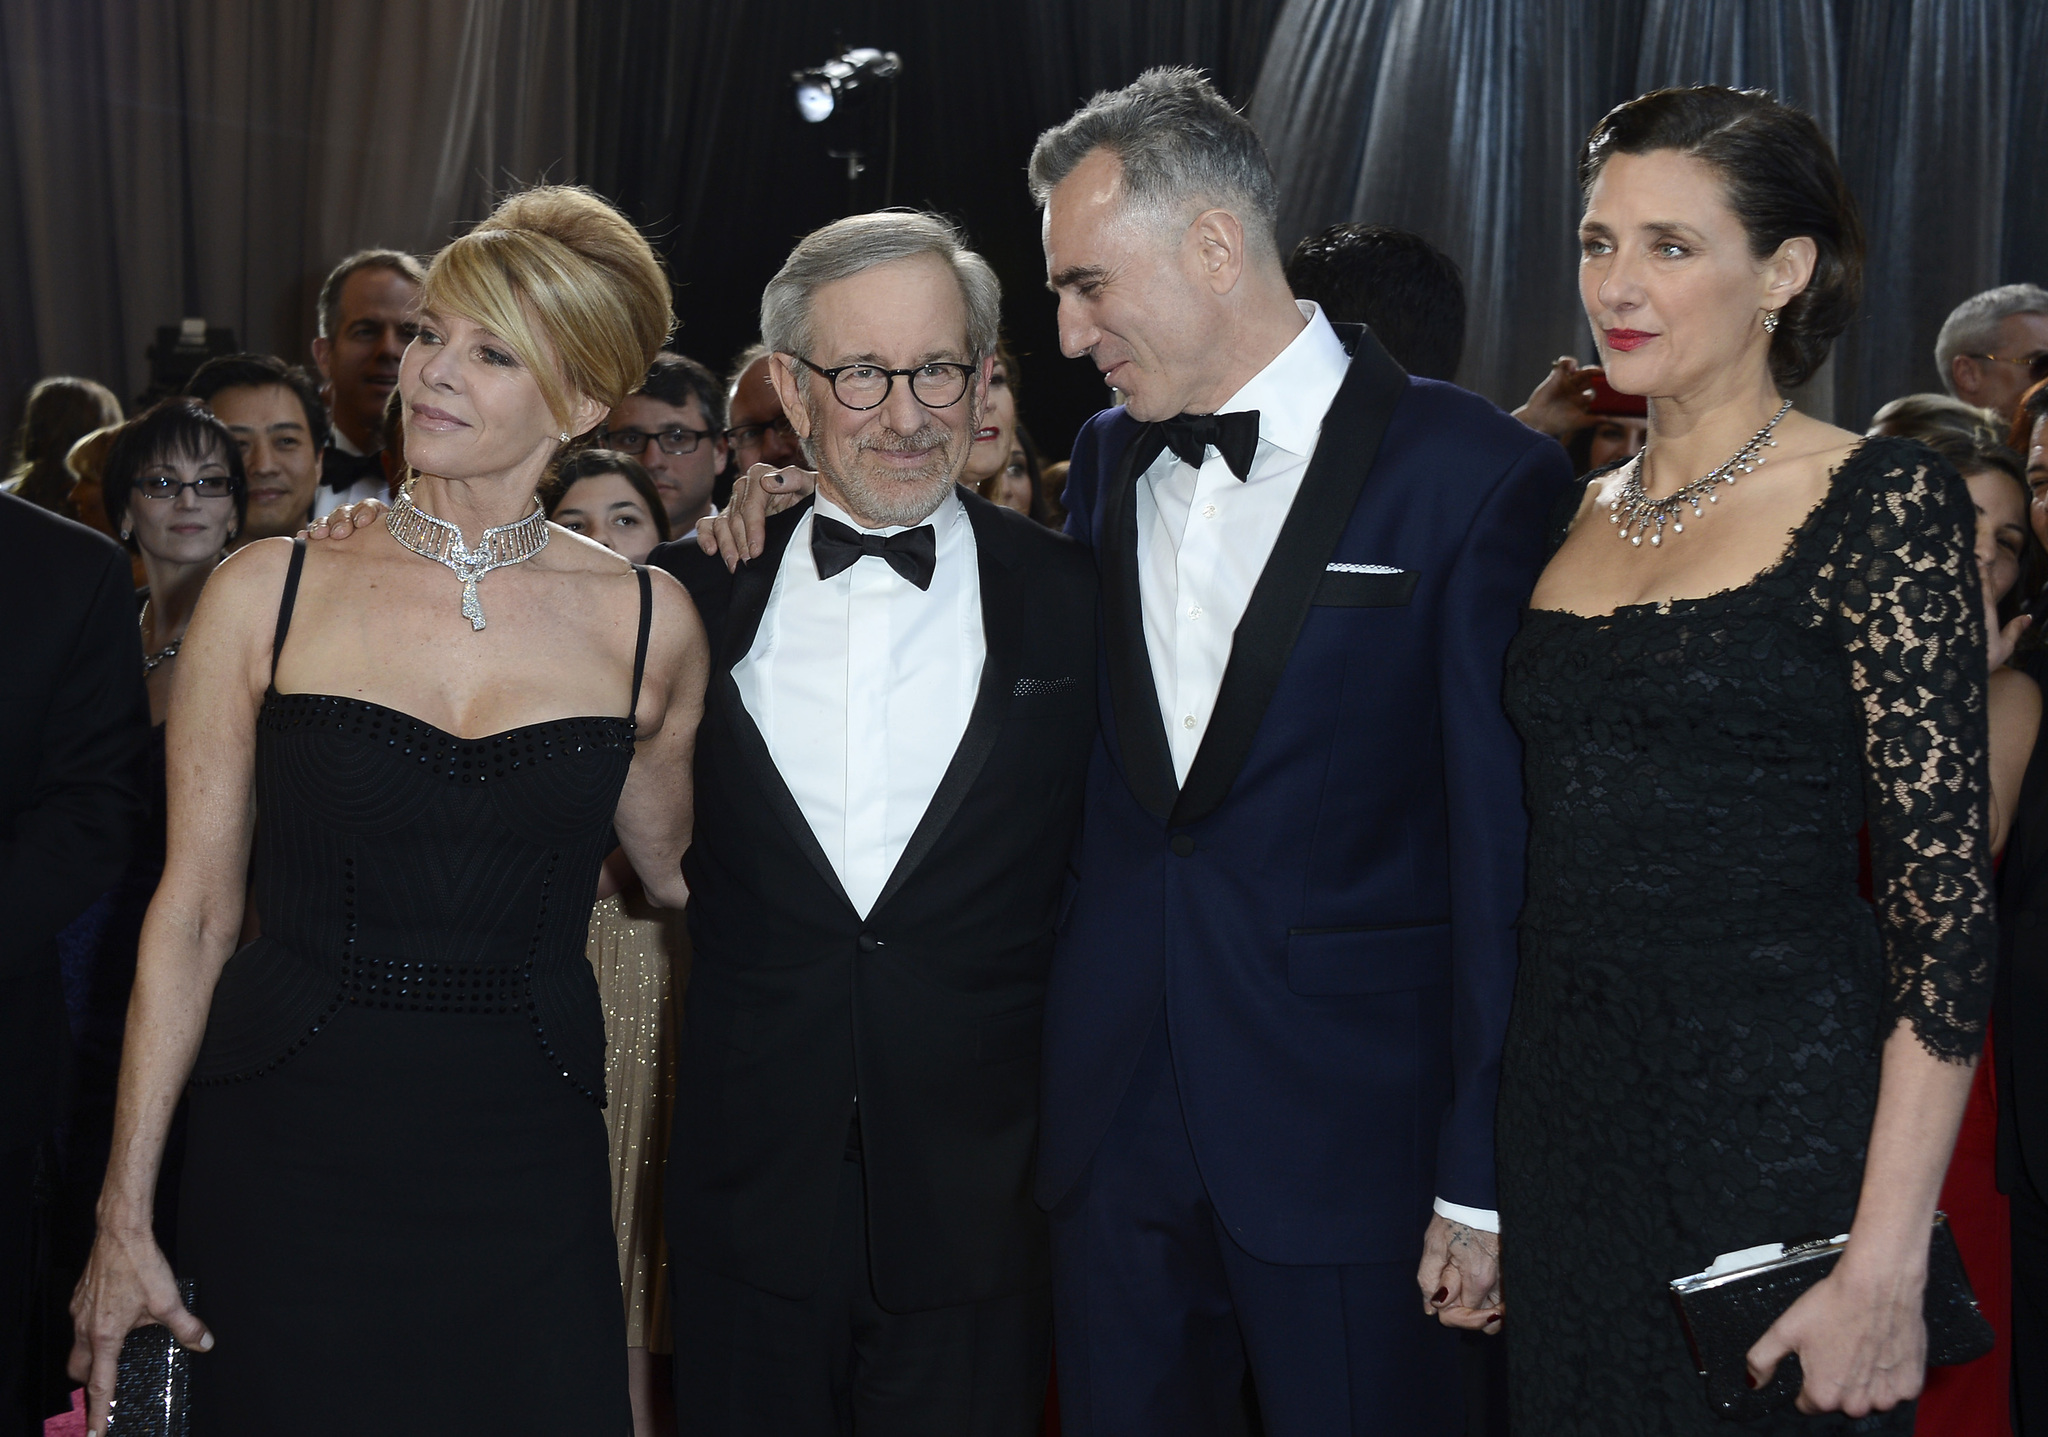 Steven Spielberg, Daniel Day-Lewis, Kate Capshaw and Rebecca Miller